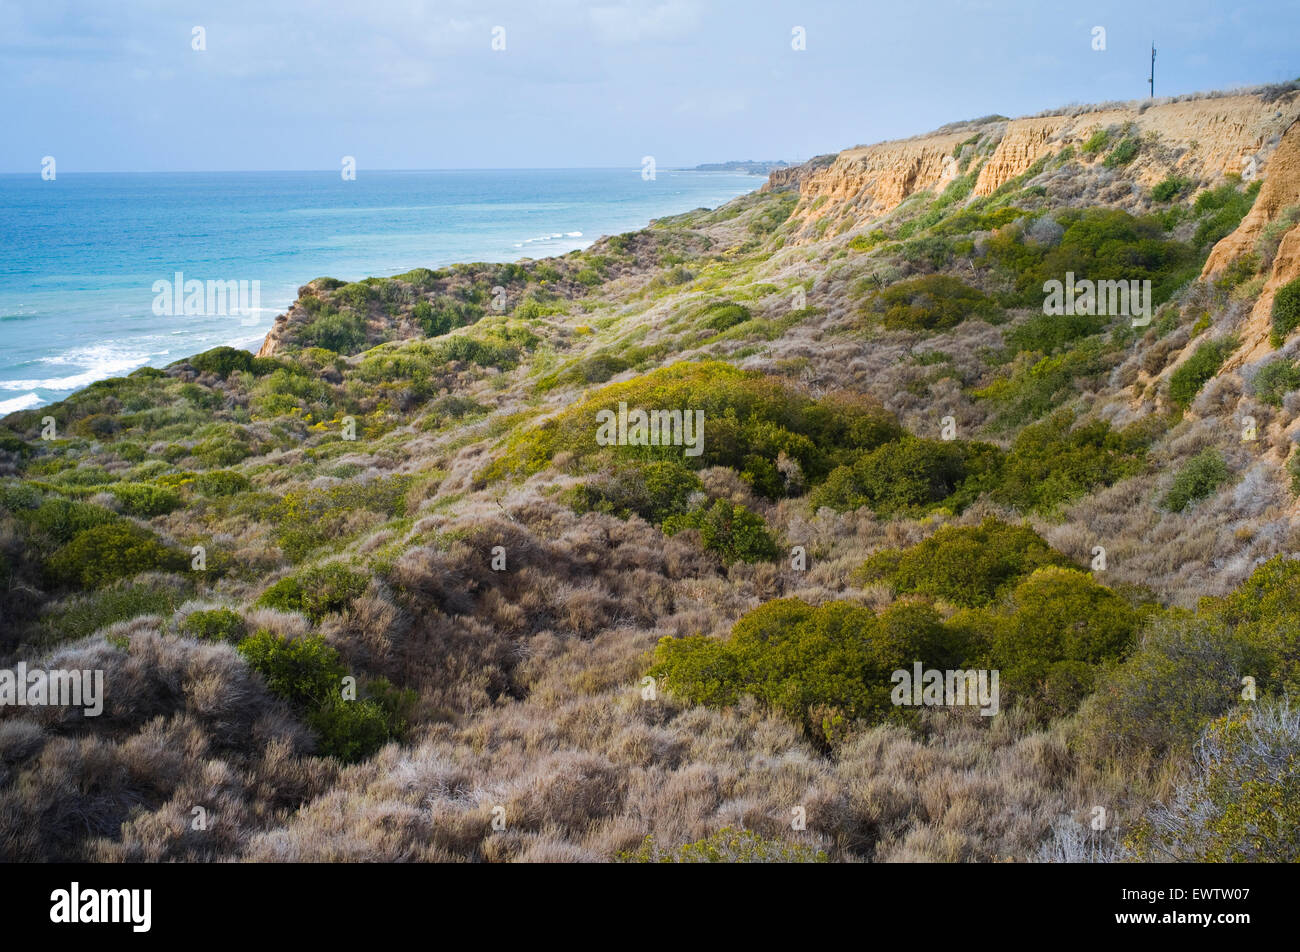 View of trees and wild flowers at San Onofre surf beach in southern California with the Pacific Ocean in the distance. Stock Photo